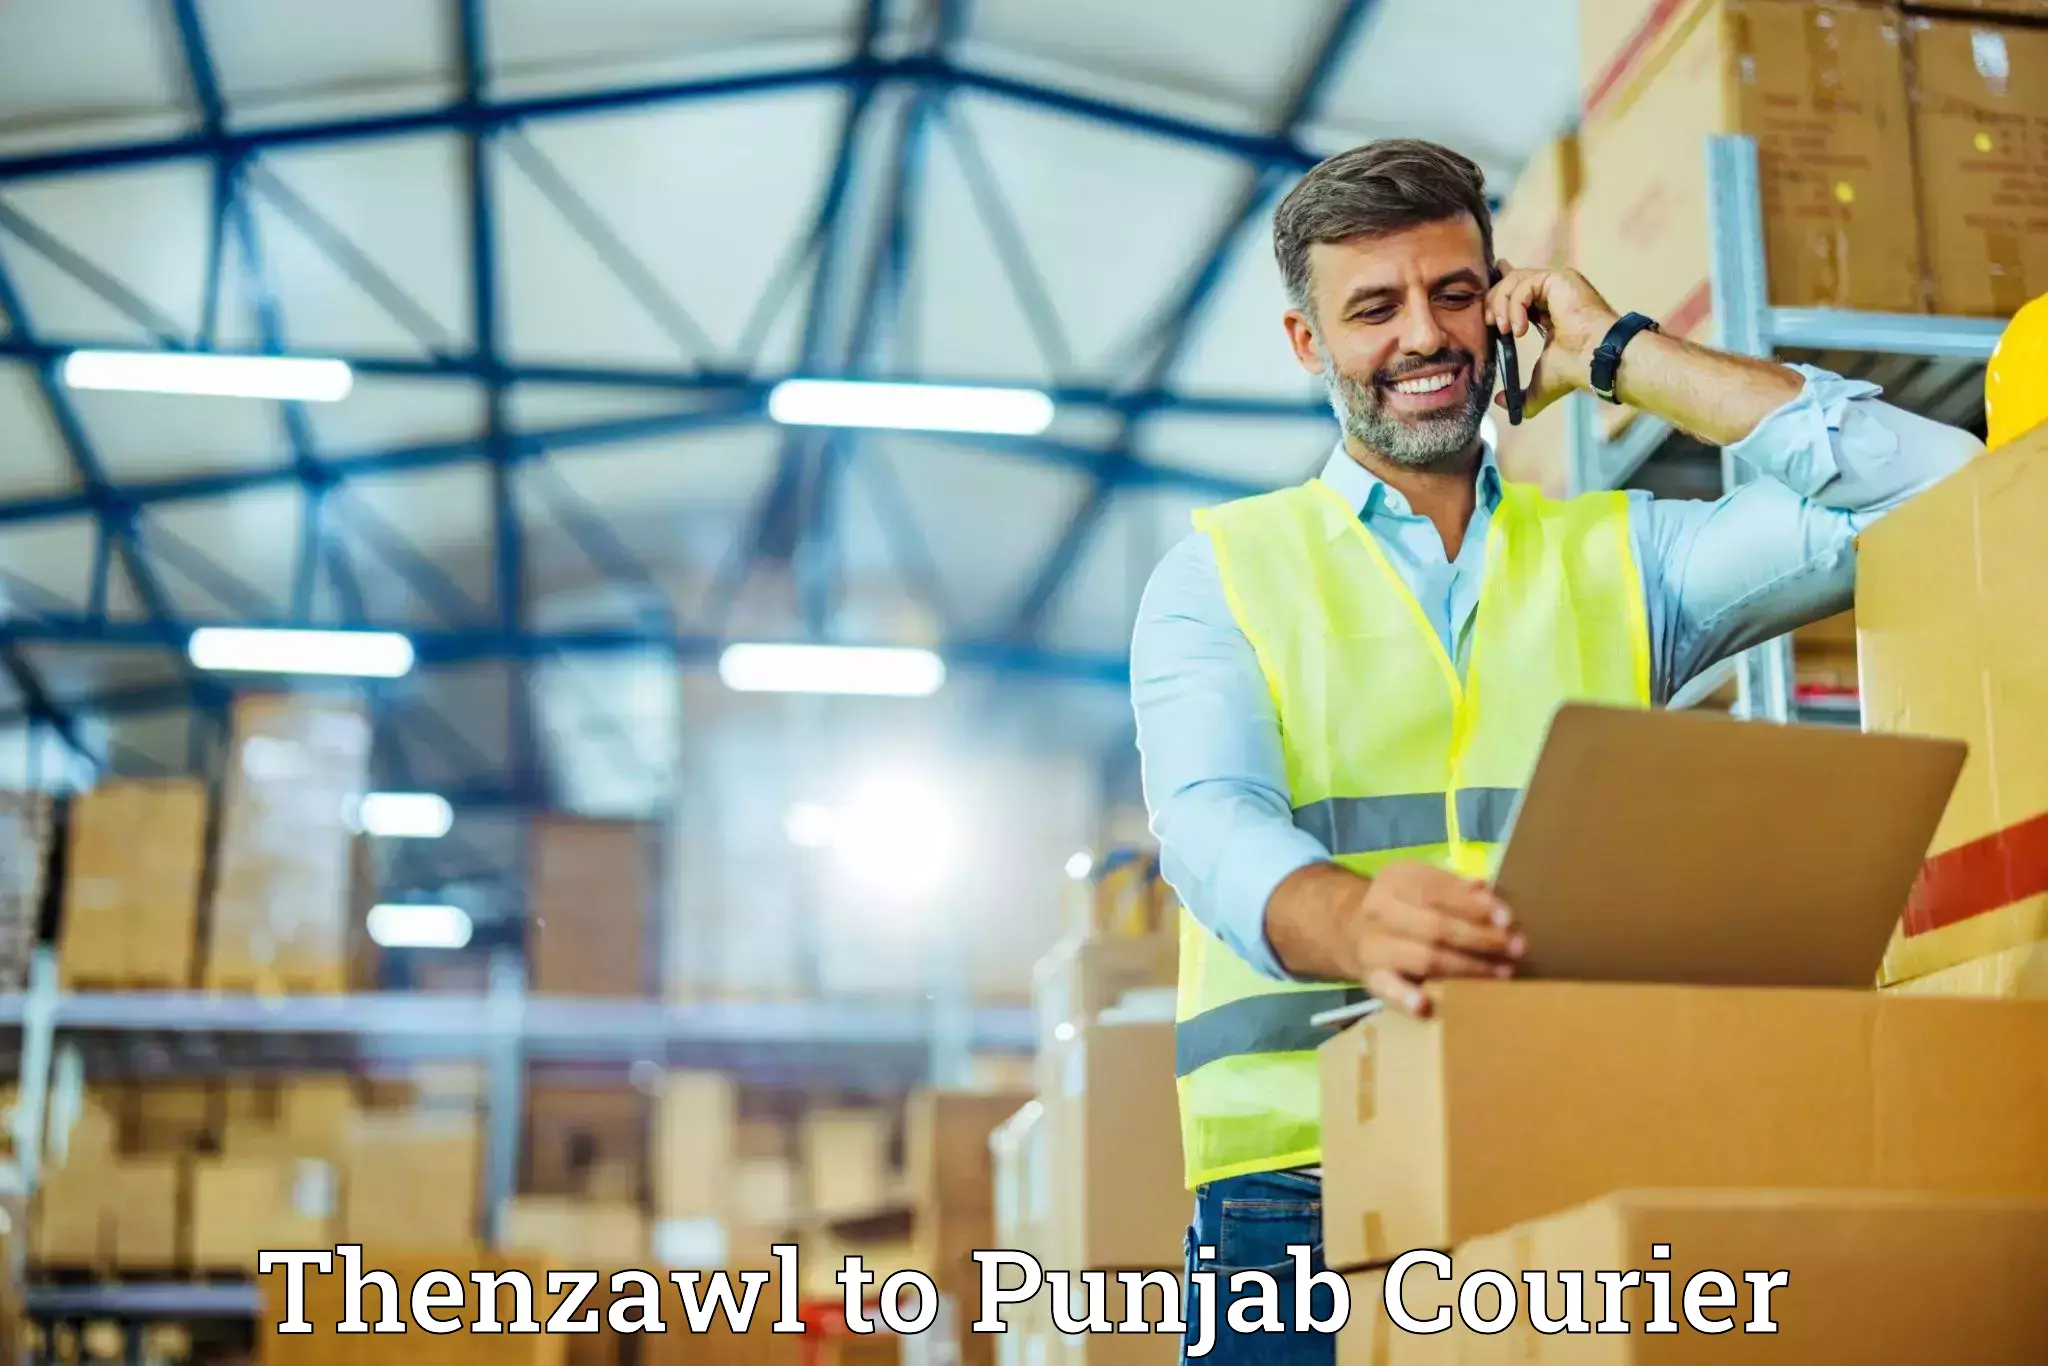 Furniture transport specialists Thenzawl to Dhuri